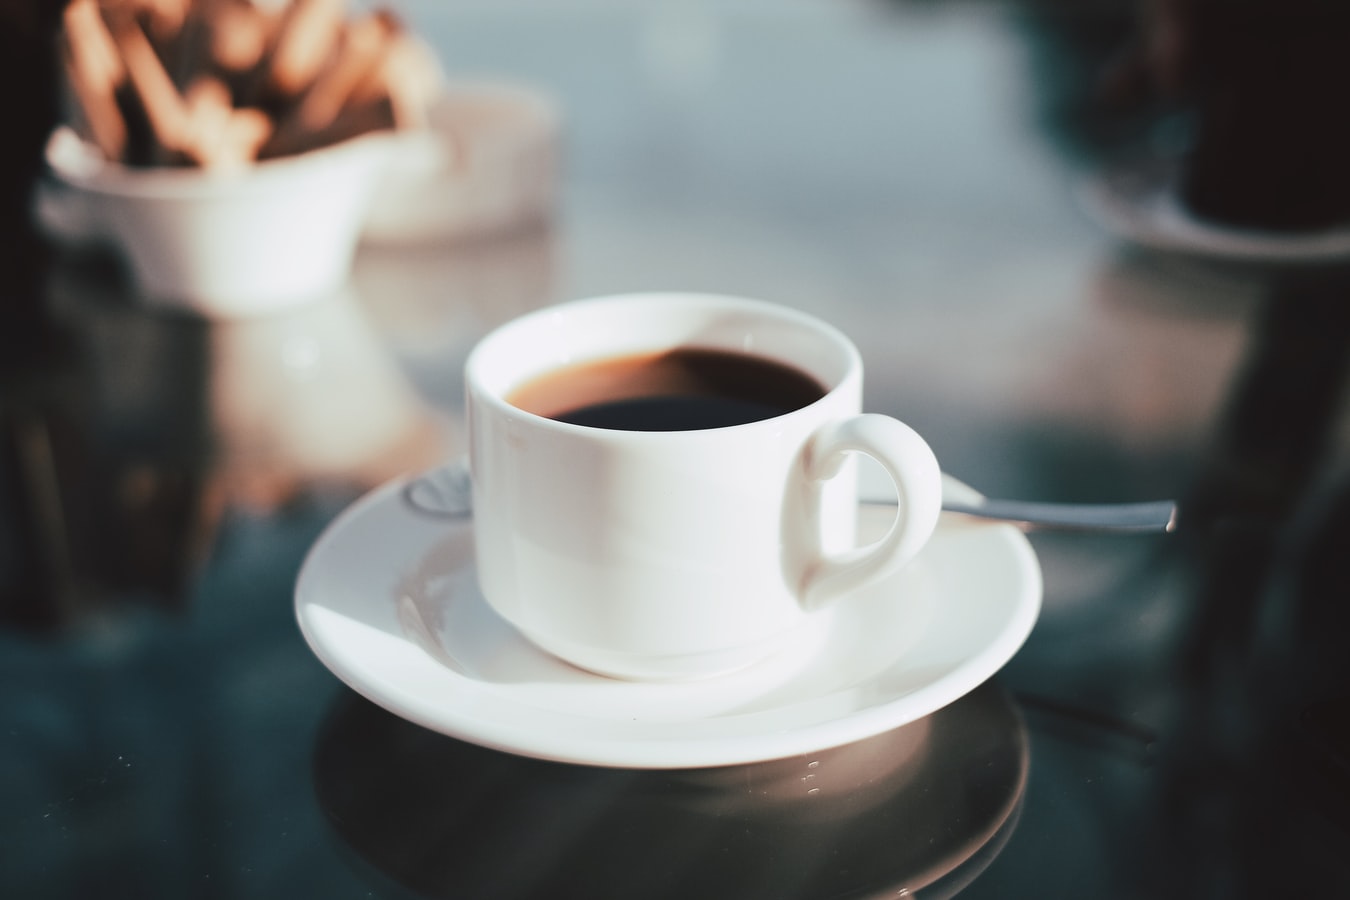 A cup of coffee. Many individuals need coffee as motivation to start their day